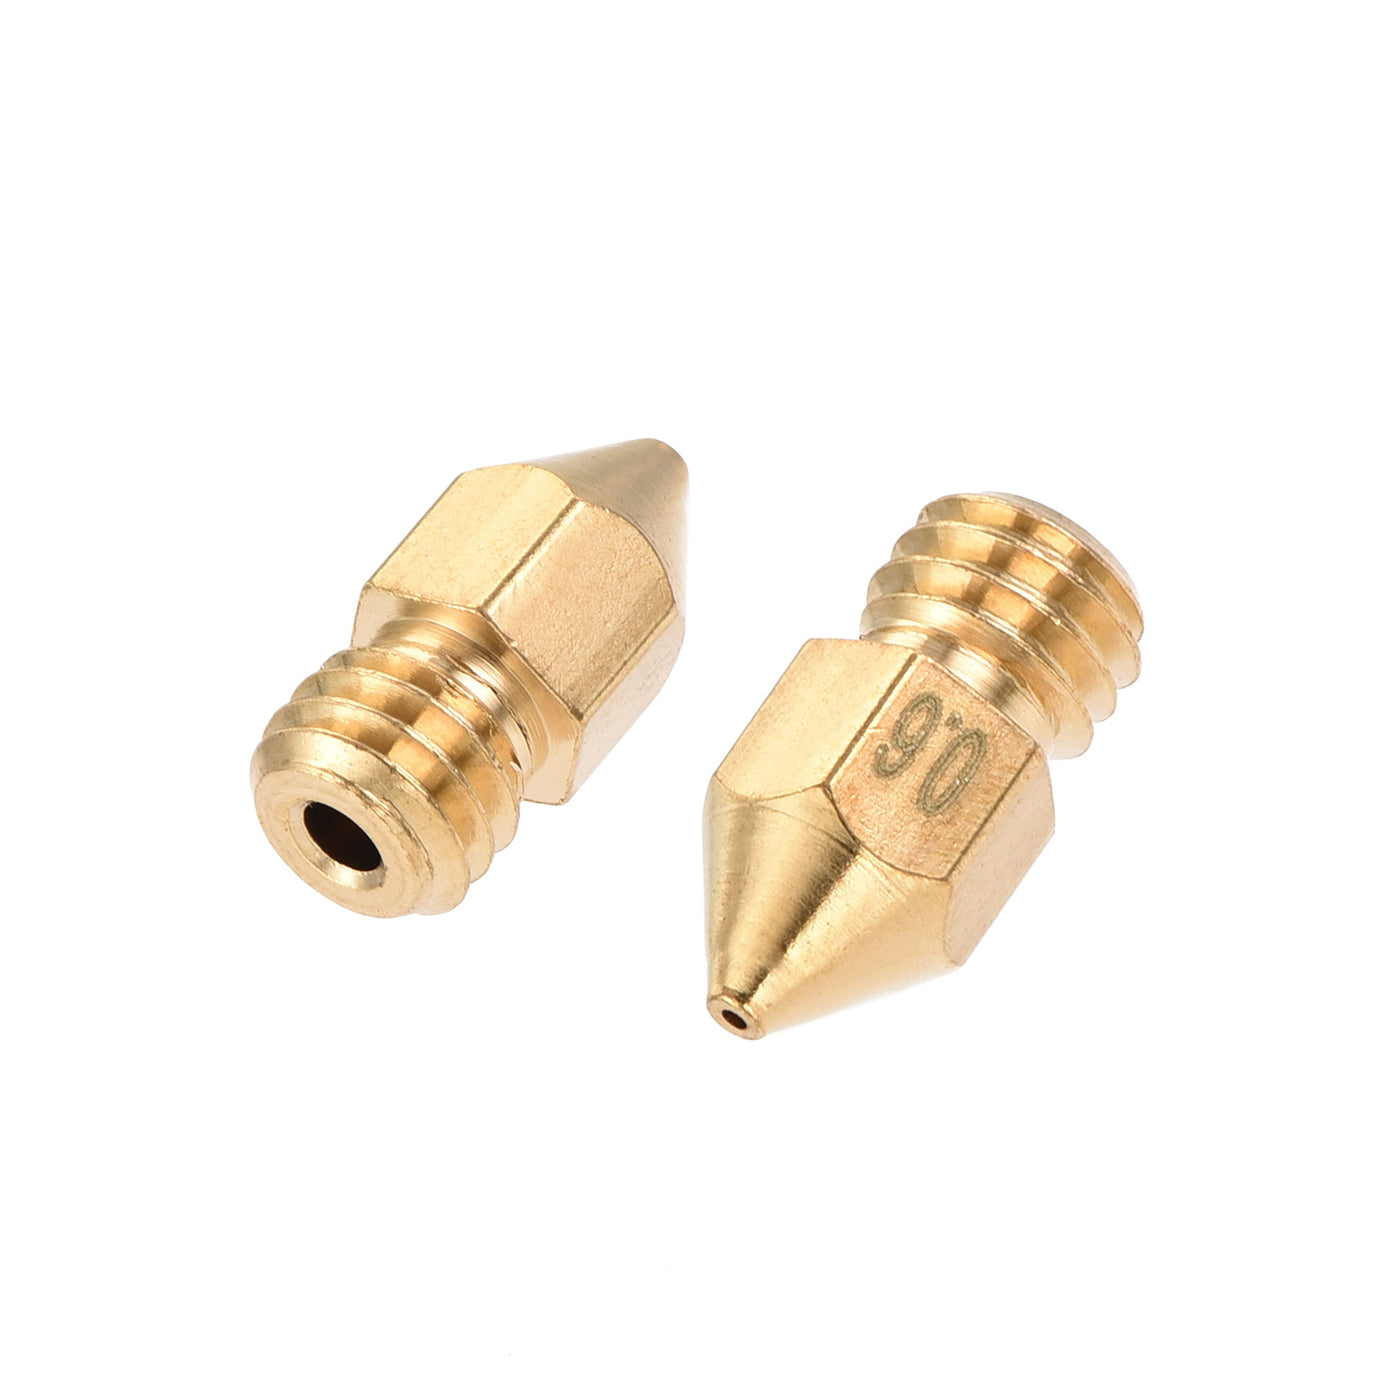 uxcell Uxcell 0.6mm 3D Printer Nozzle, 24pcs M6 Thread for MK8 1.75mm Extruder Print, Brass